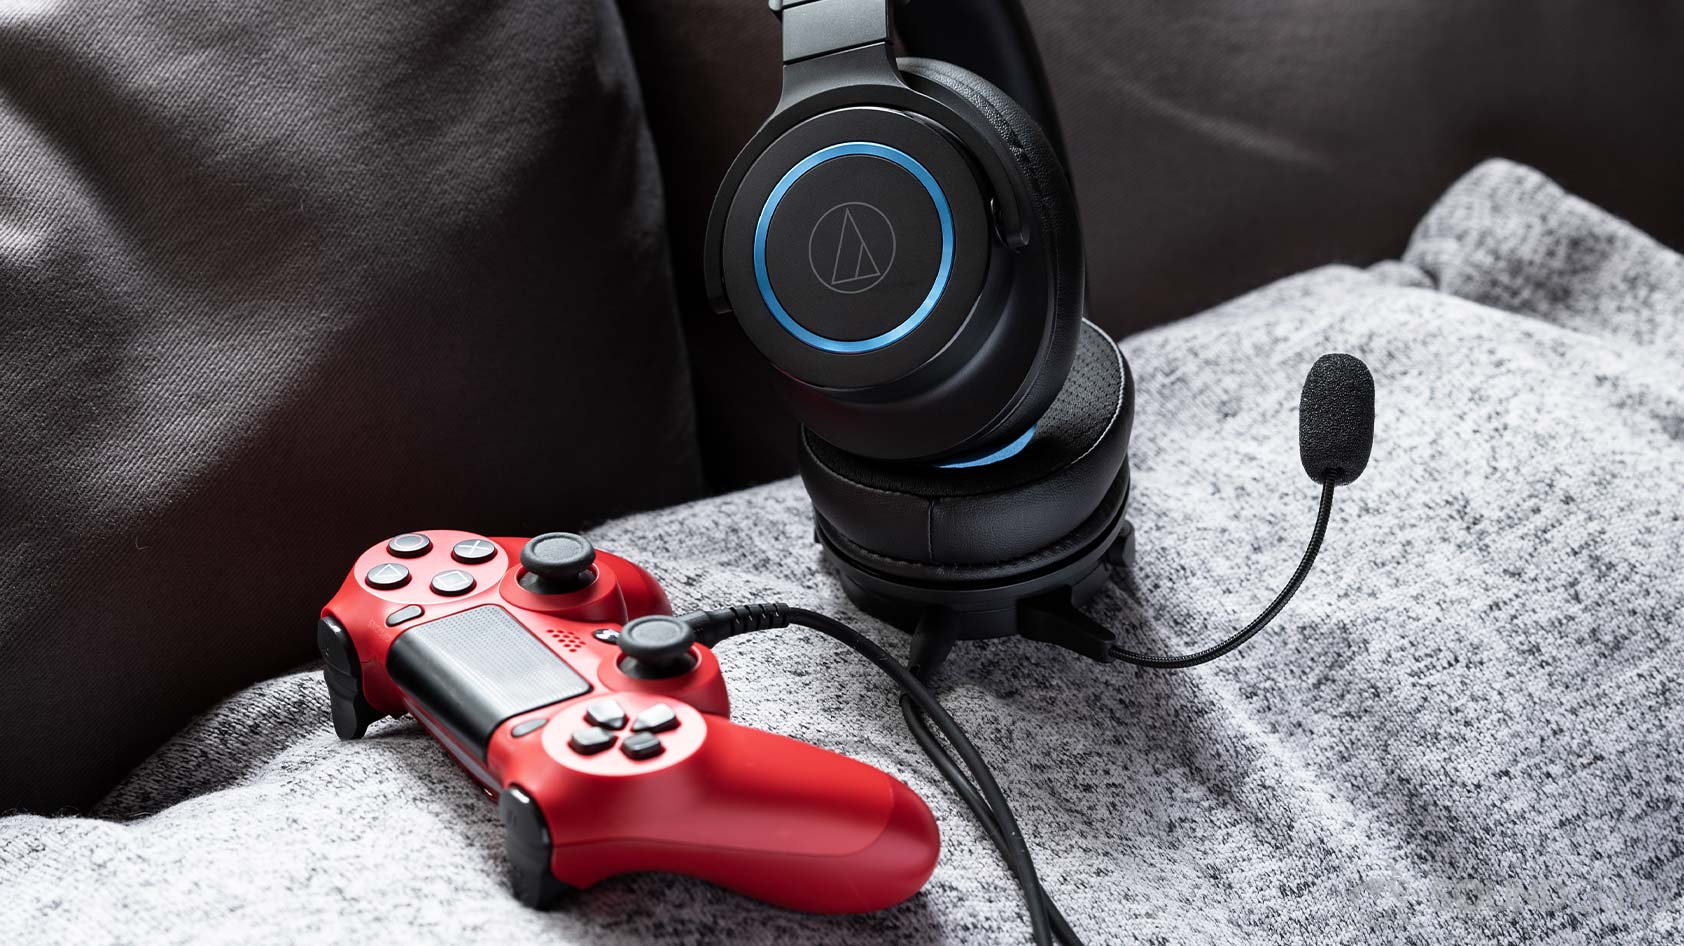 The Audio-Technica ATH-G1 gaming headset plugged into a red PS4 controller.